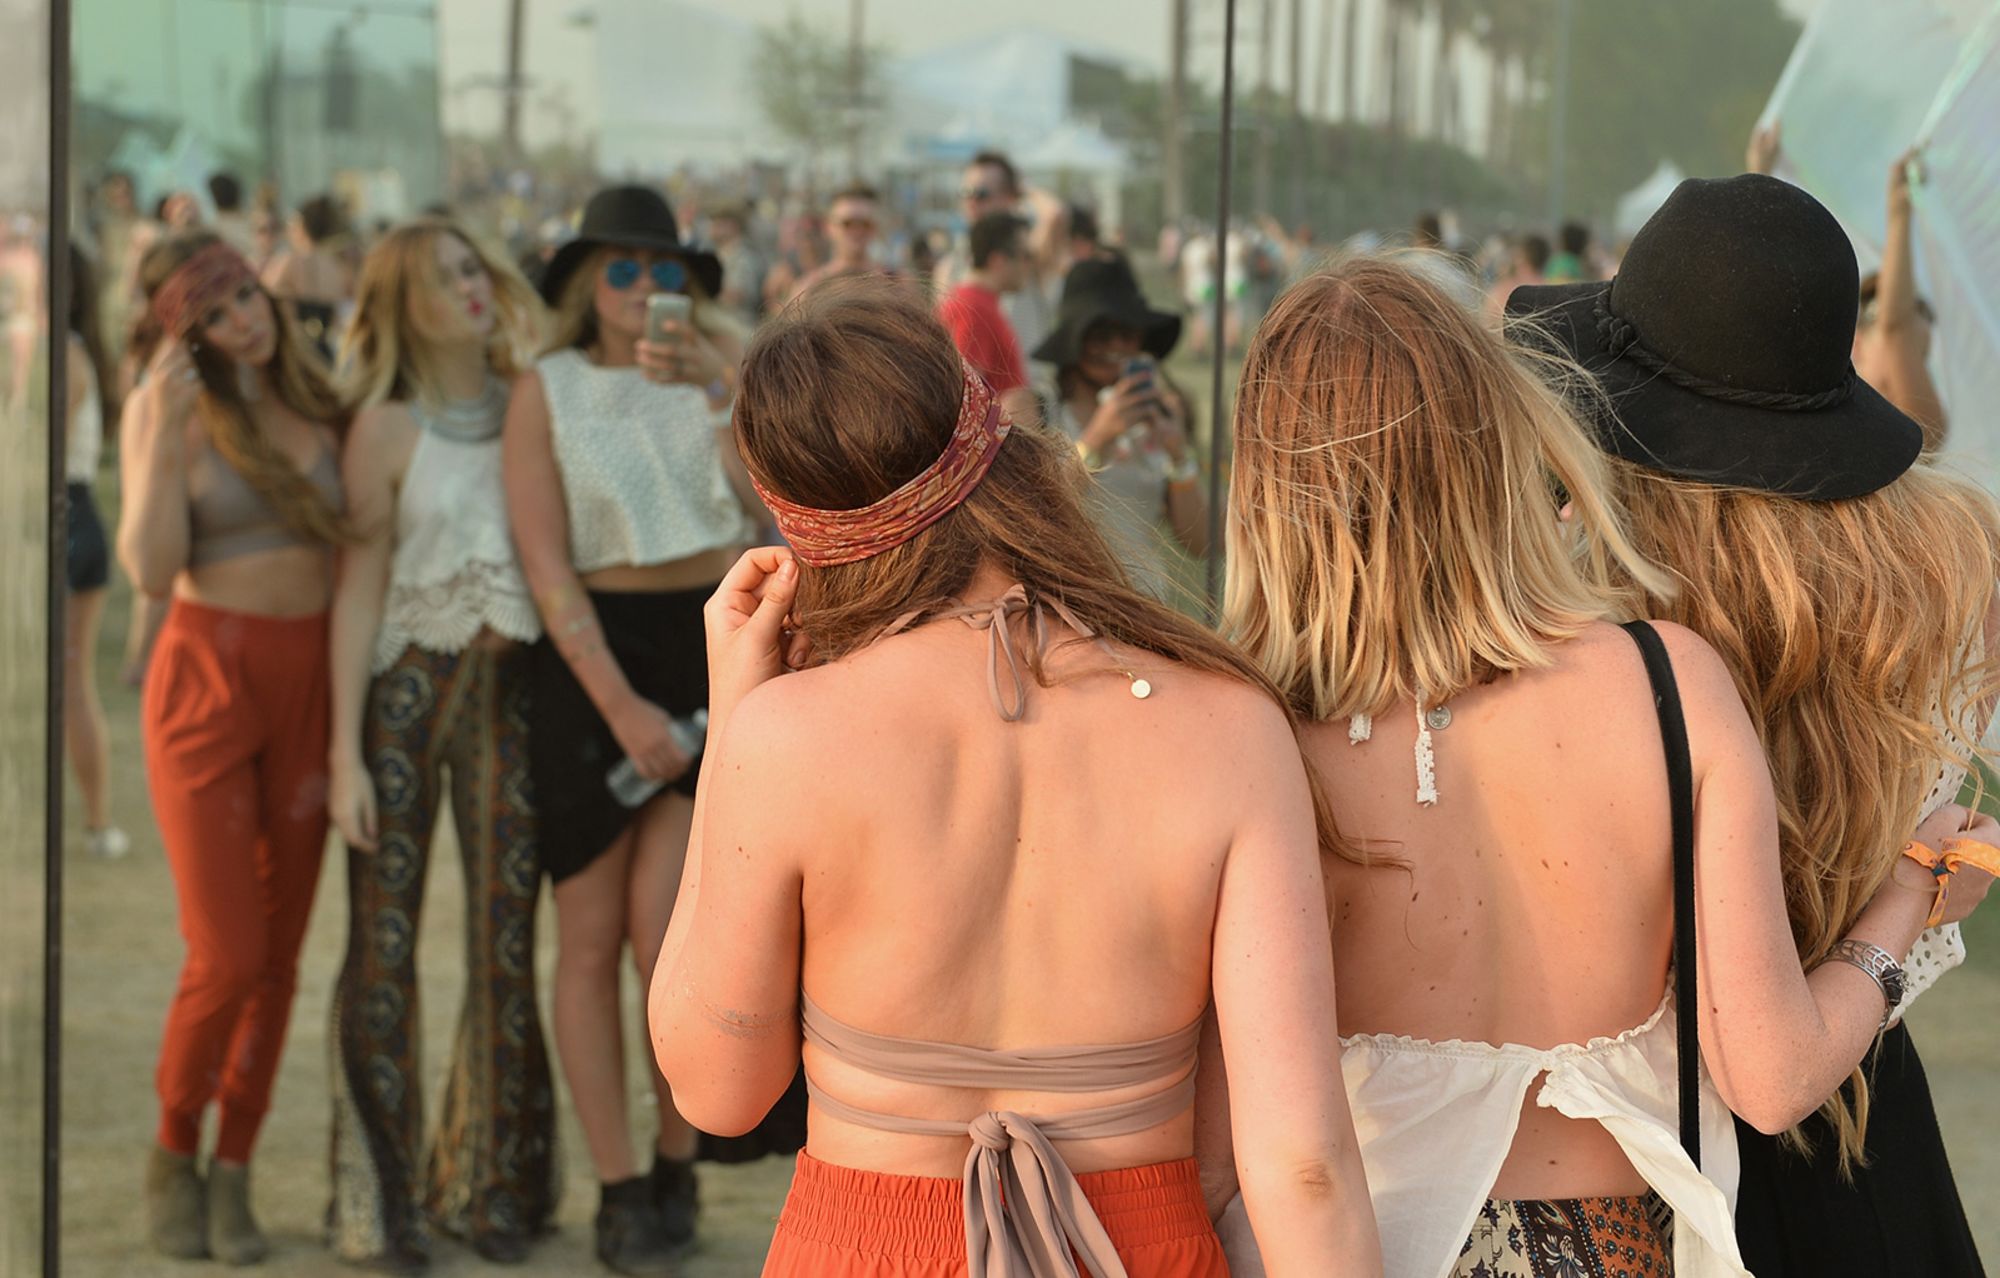 Comparing Festival Fashion Trends Between the US and Europe